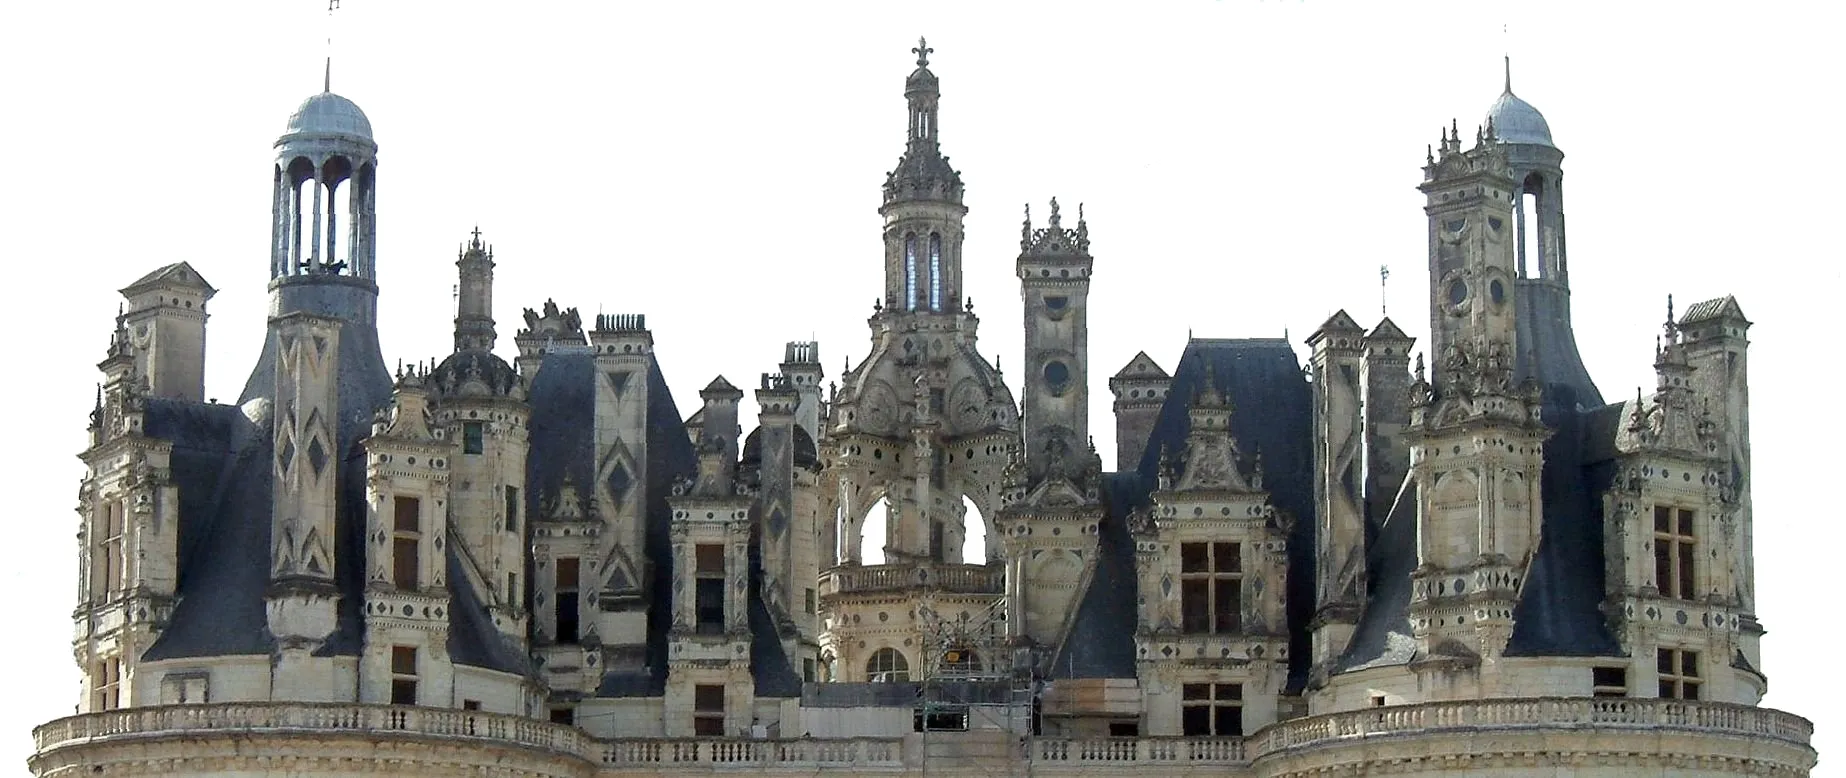 Photo showing: Château de Chambord, Chambord, France

(version with cleared background)